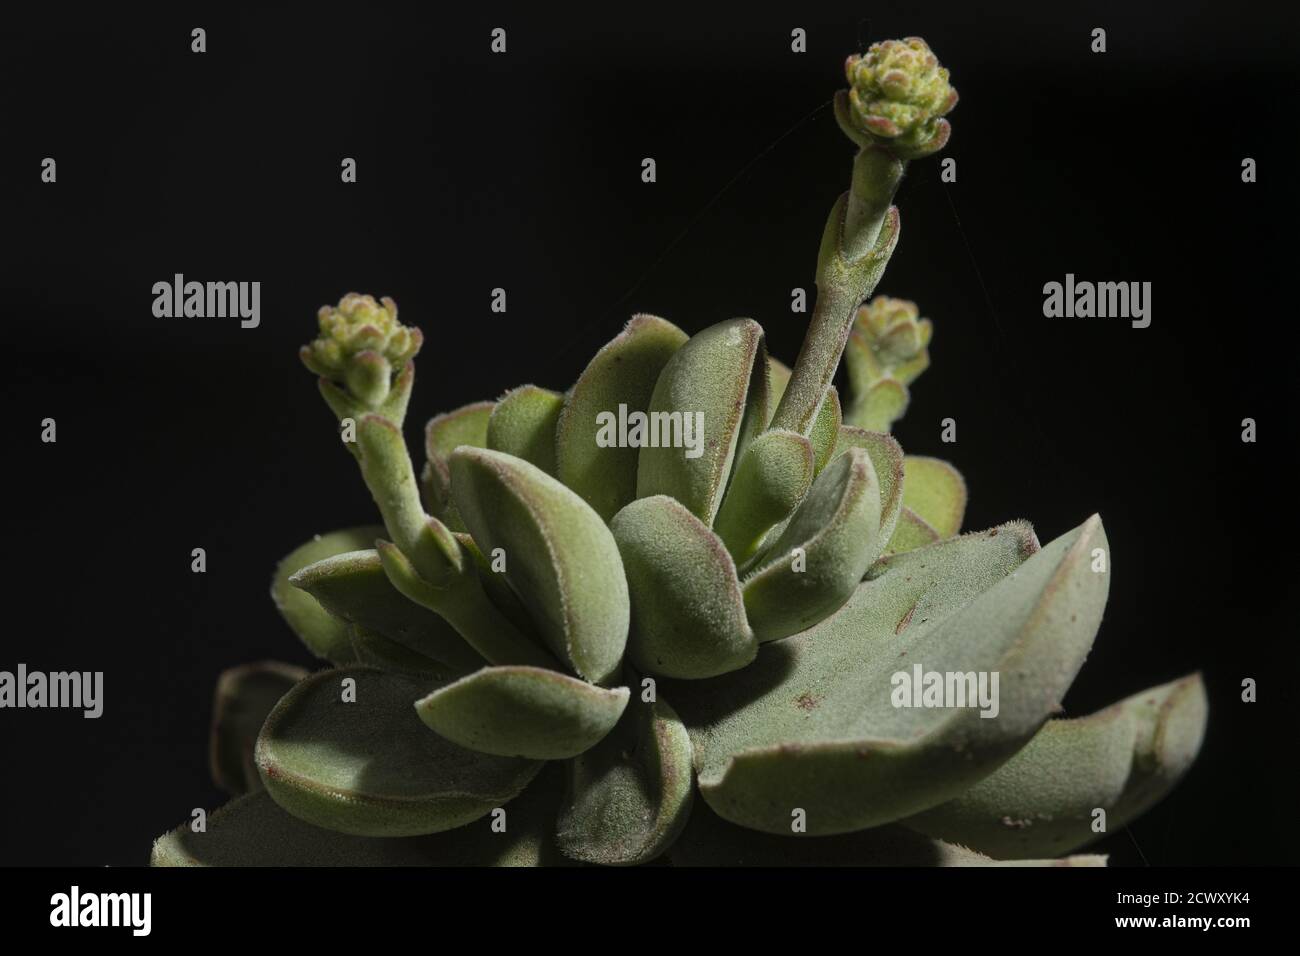 Closeup of a green echeveria subsessilis in front of a black background Stock Photo